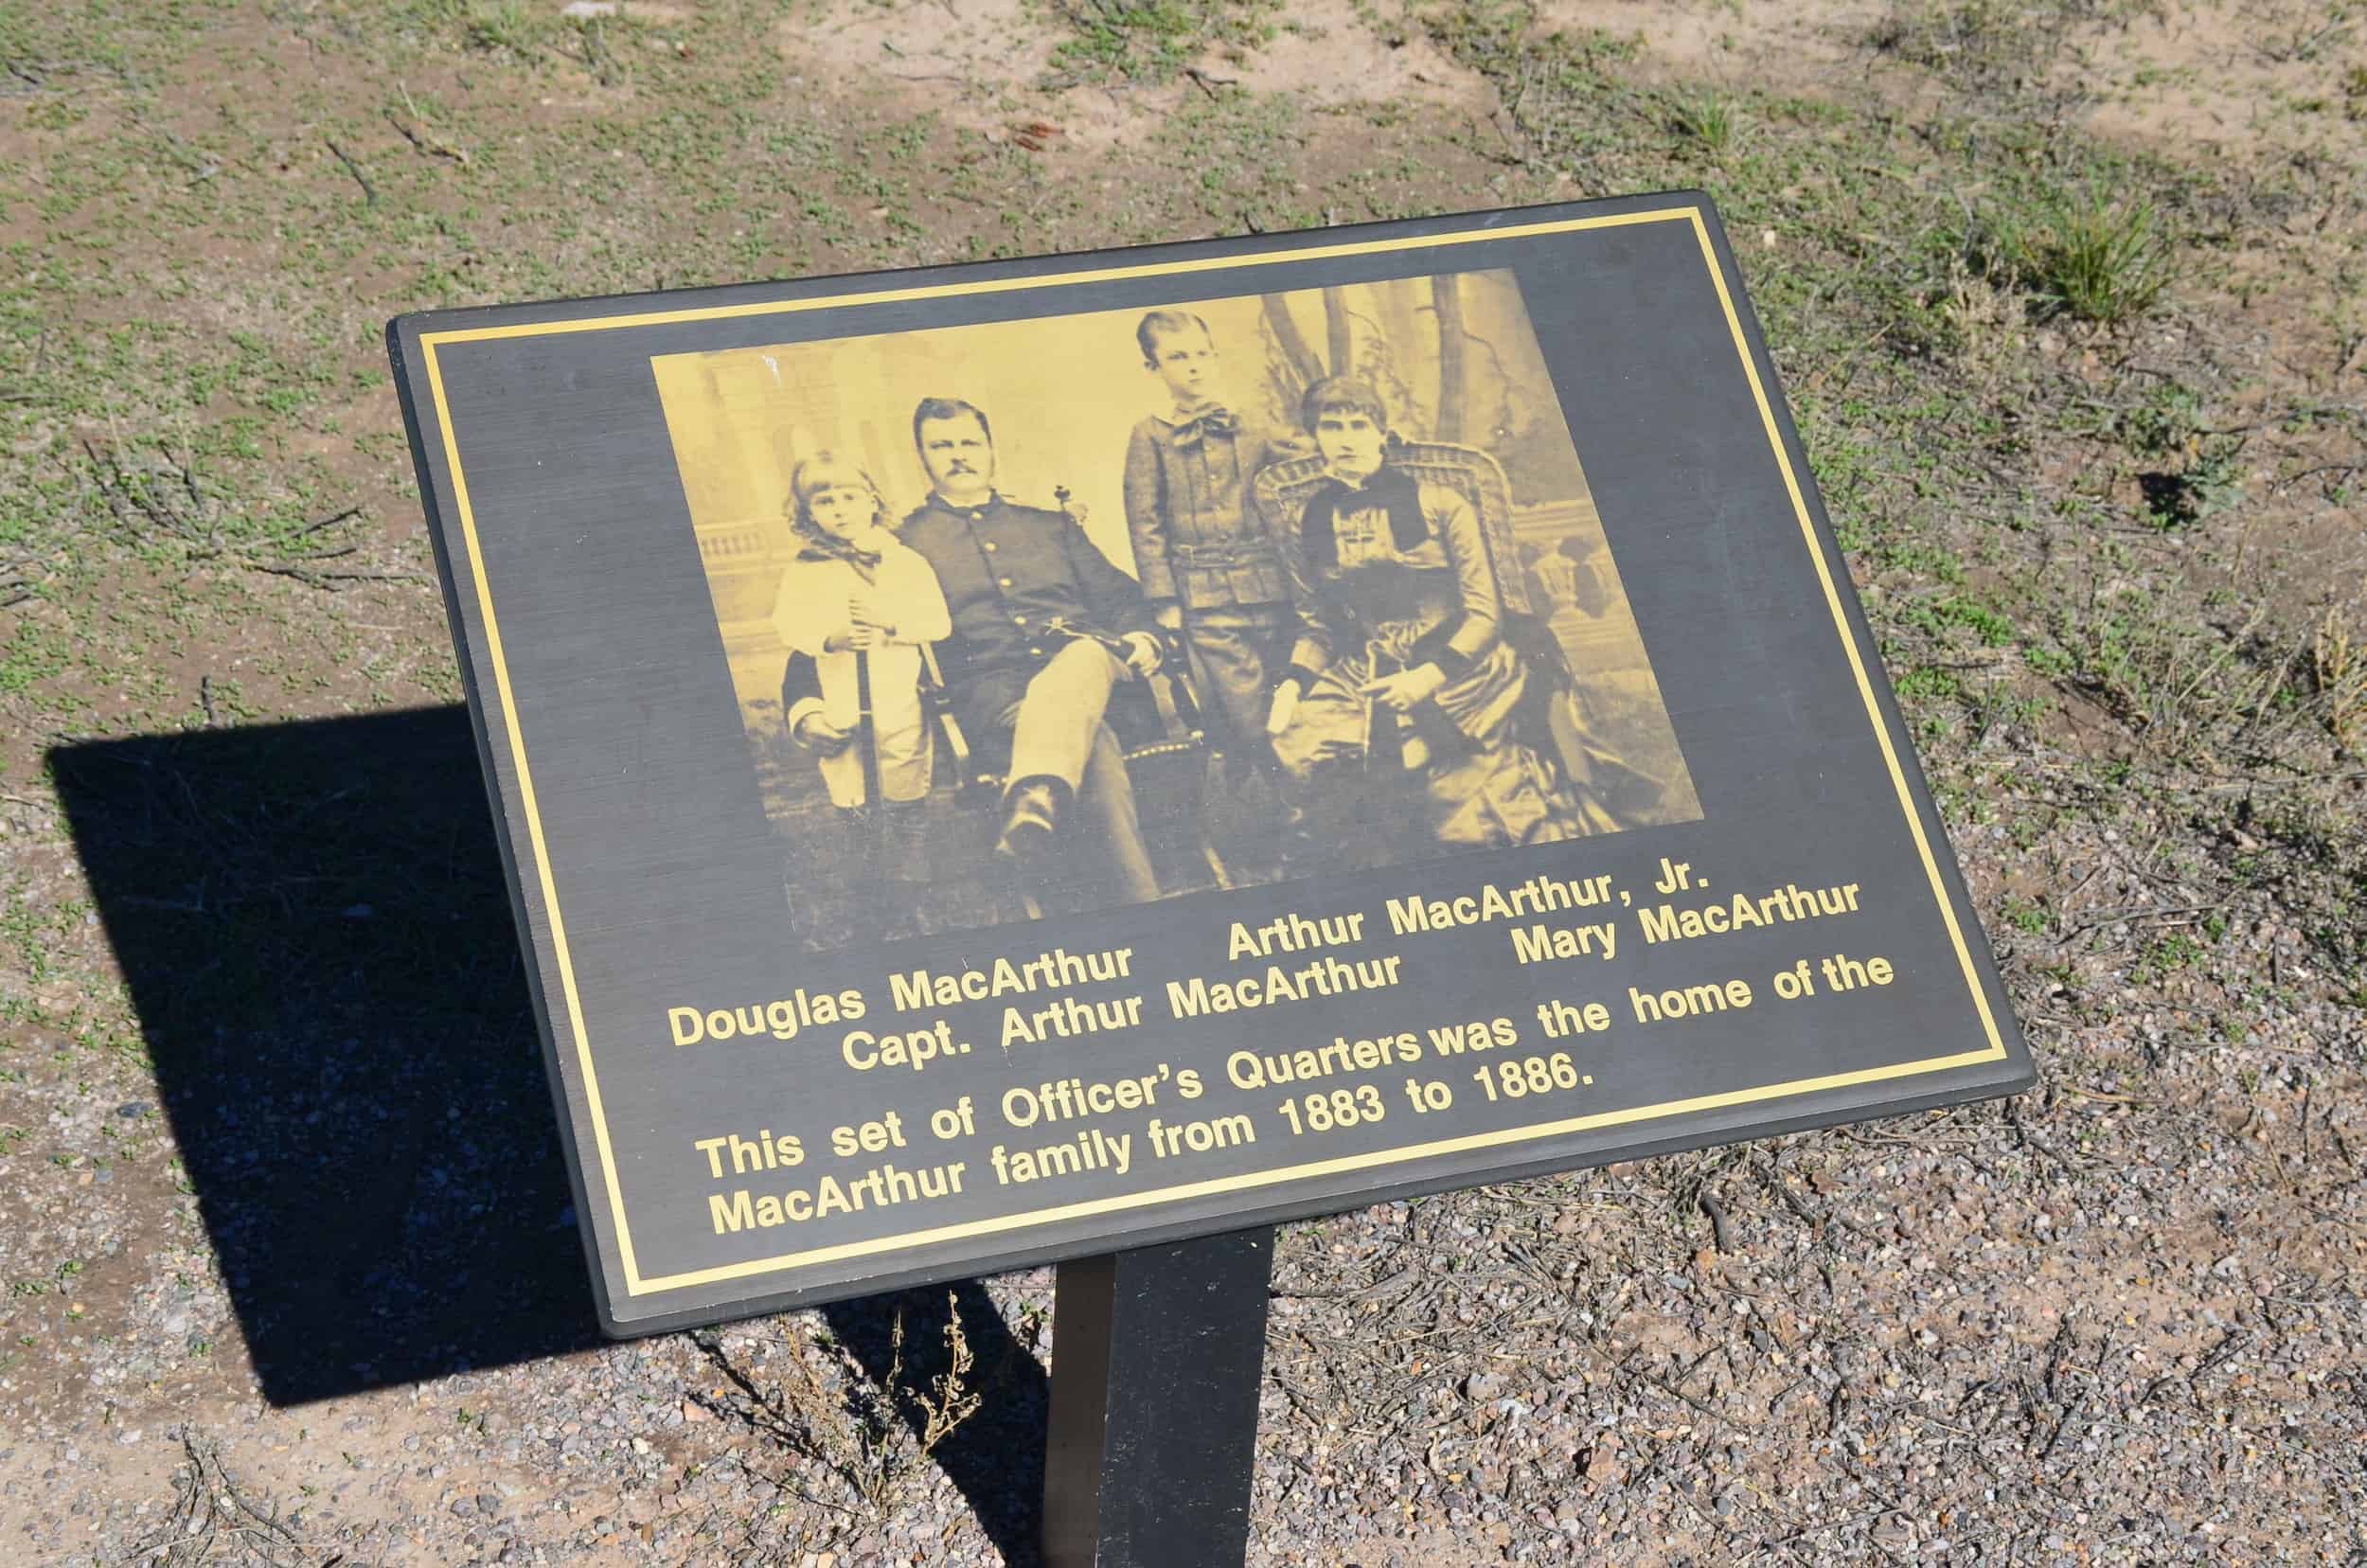 MacArthur family photo at Fort Selden Historic Site in New Mexico